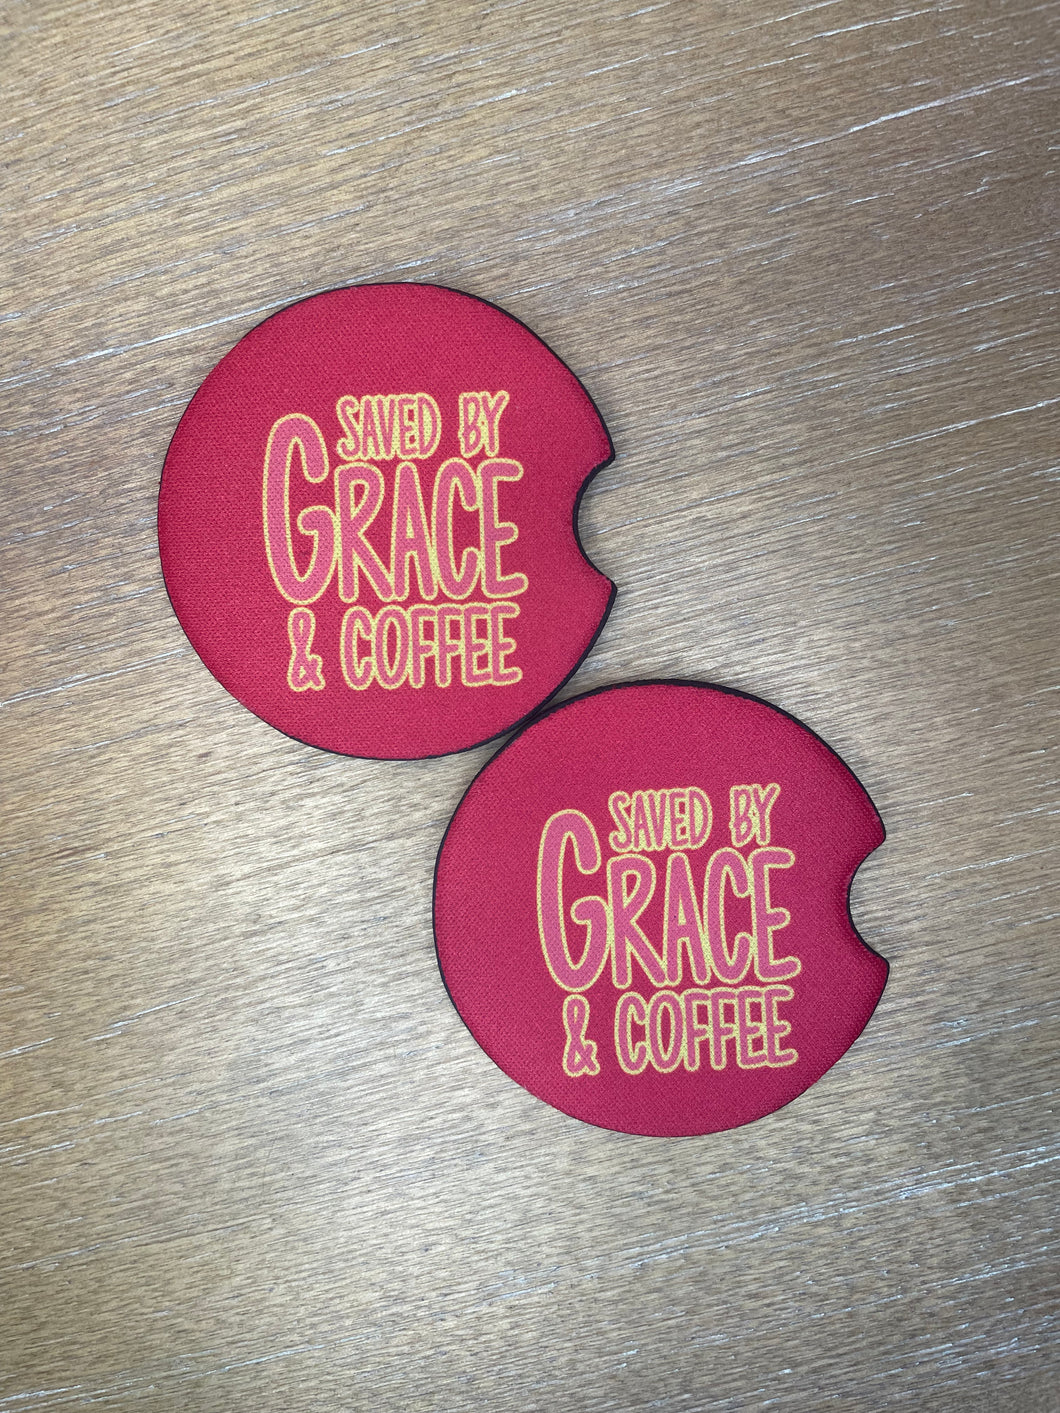 Saved By Grace & Coffee Car Coasters